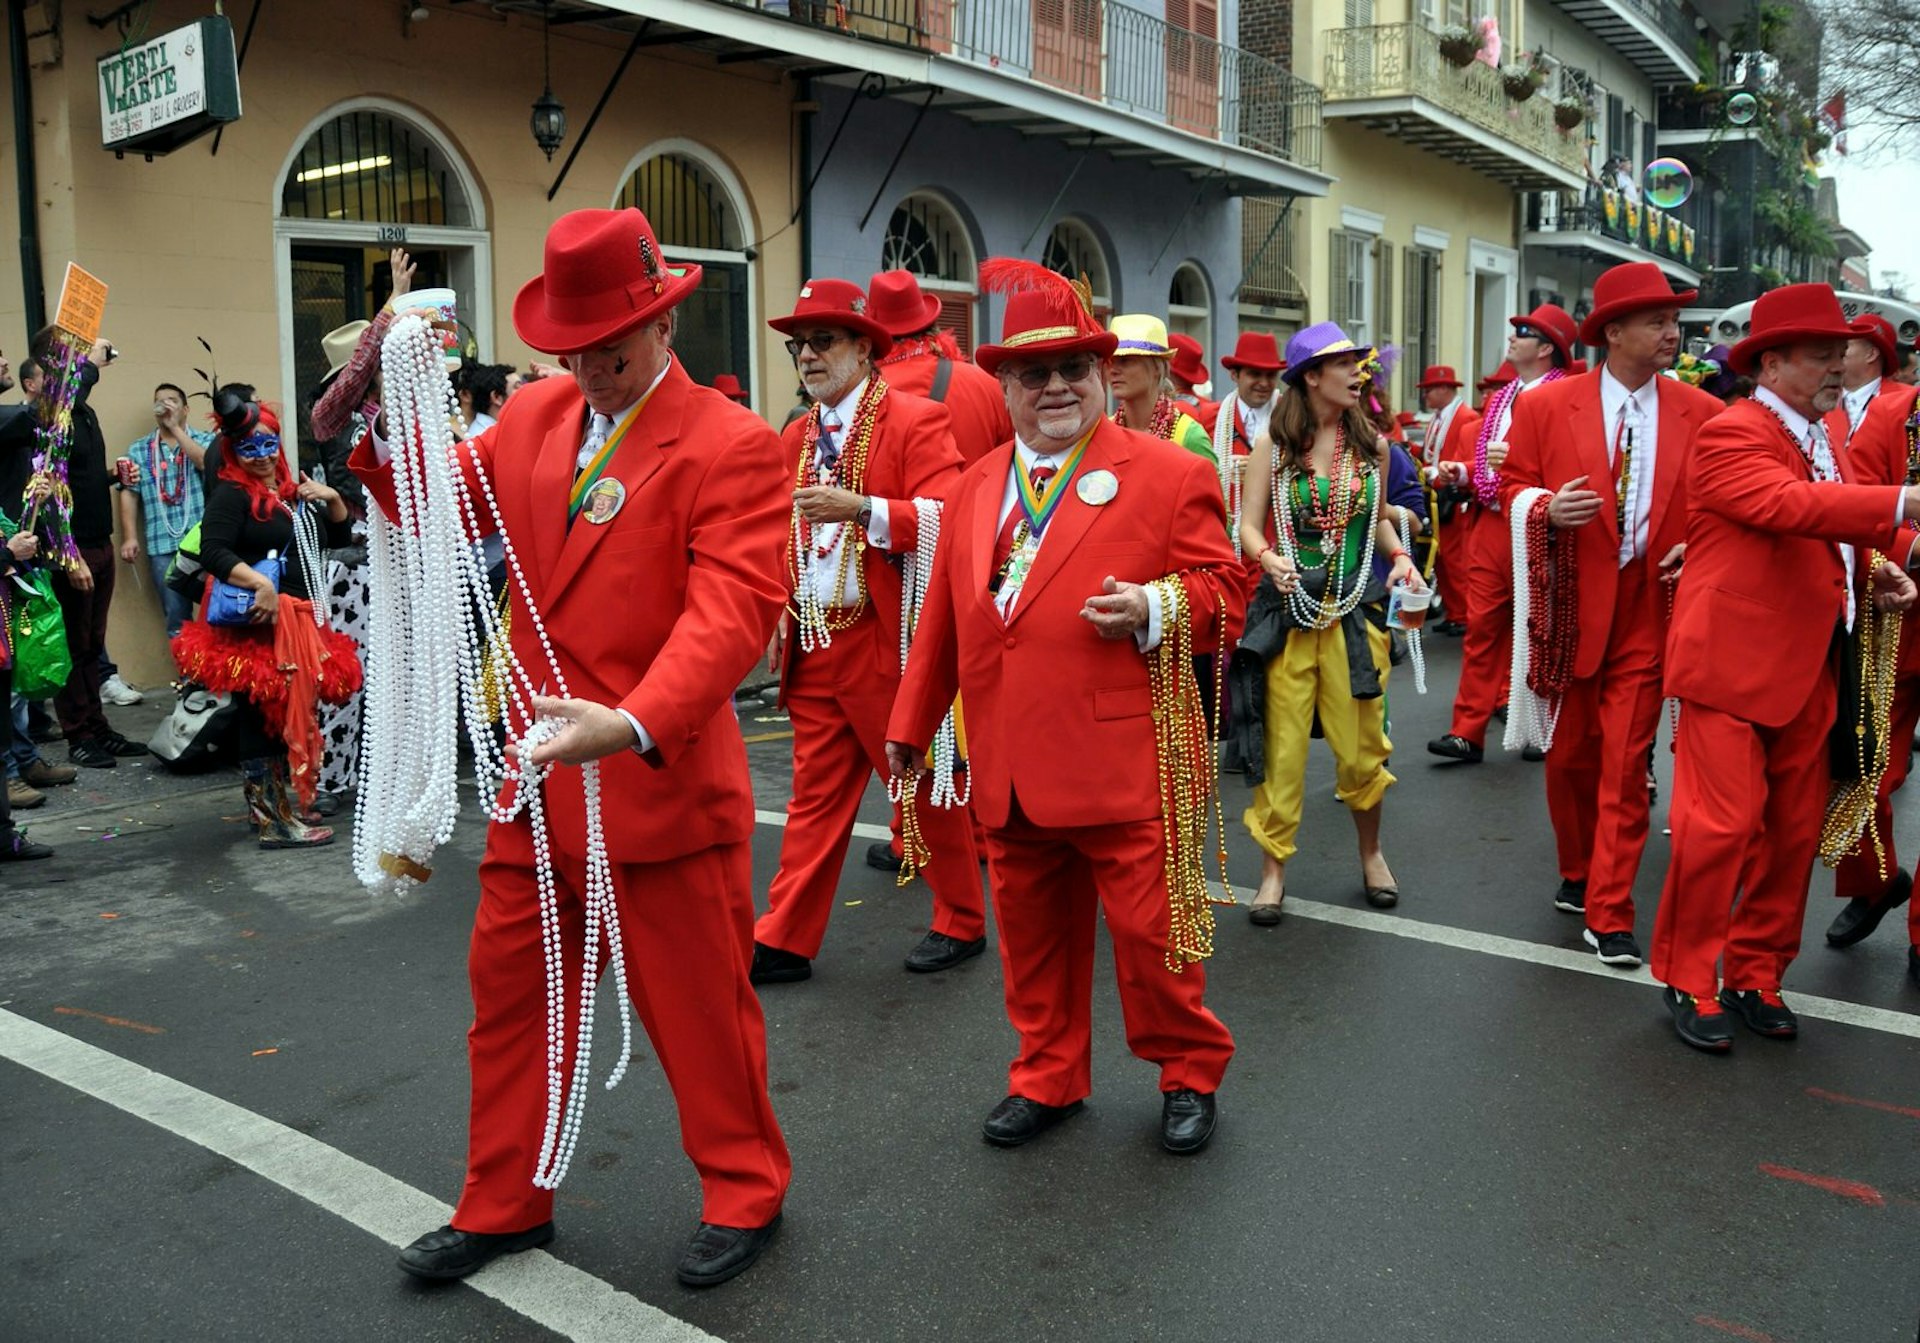 A Mardi Gras parade on Bourbon Street in New Orleans' French Quarter